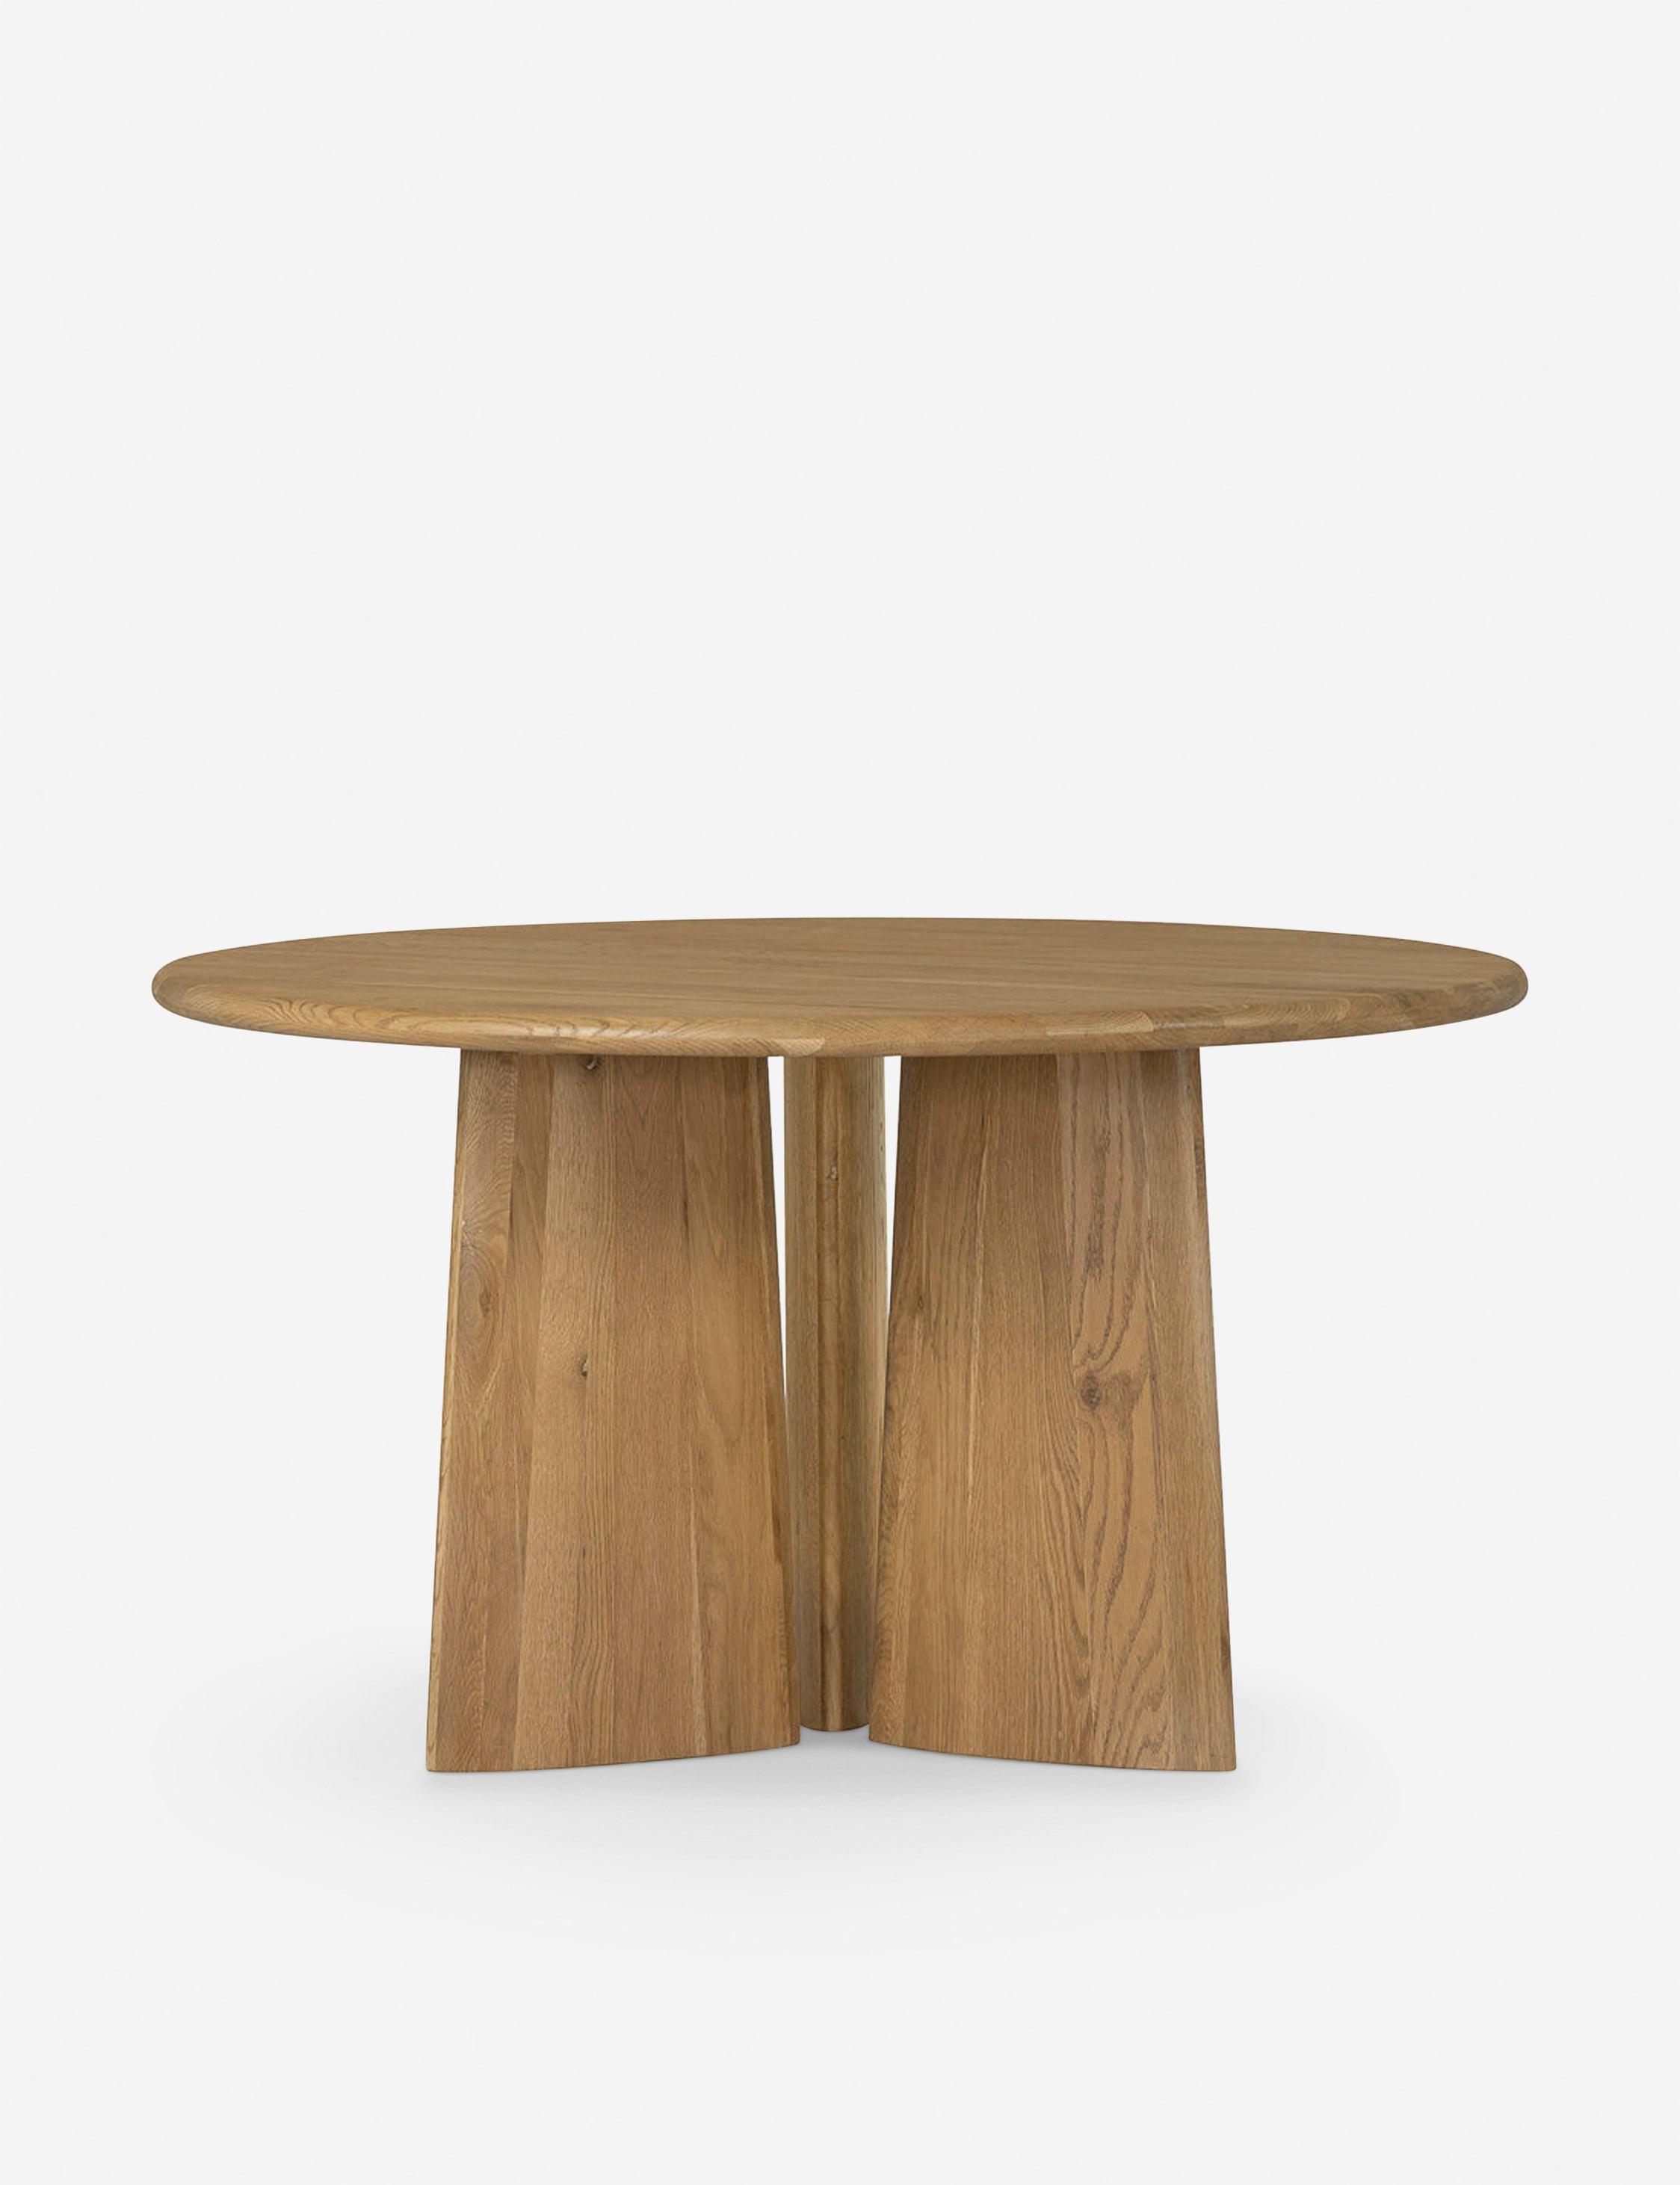 Contemporary Natural Oak Round Dining Table - 52"